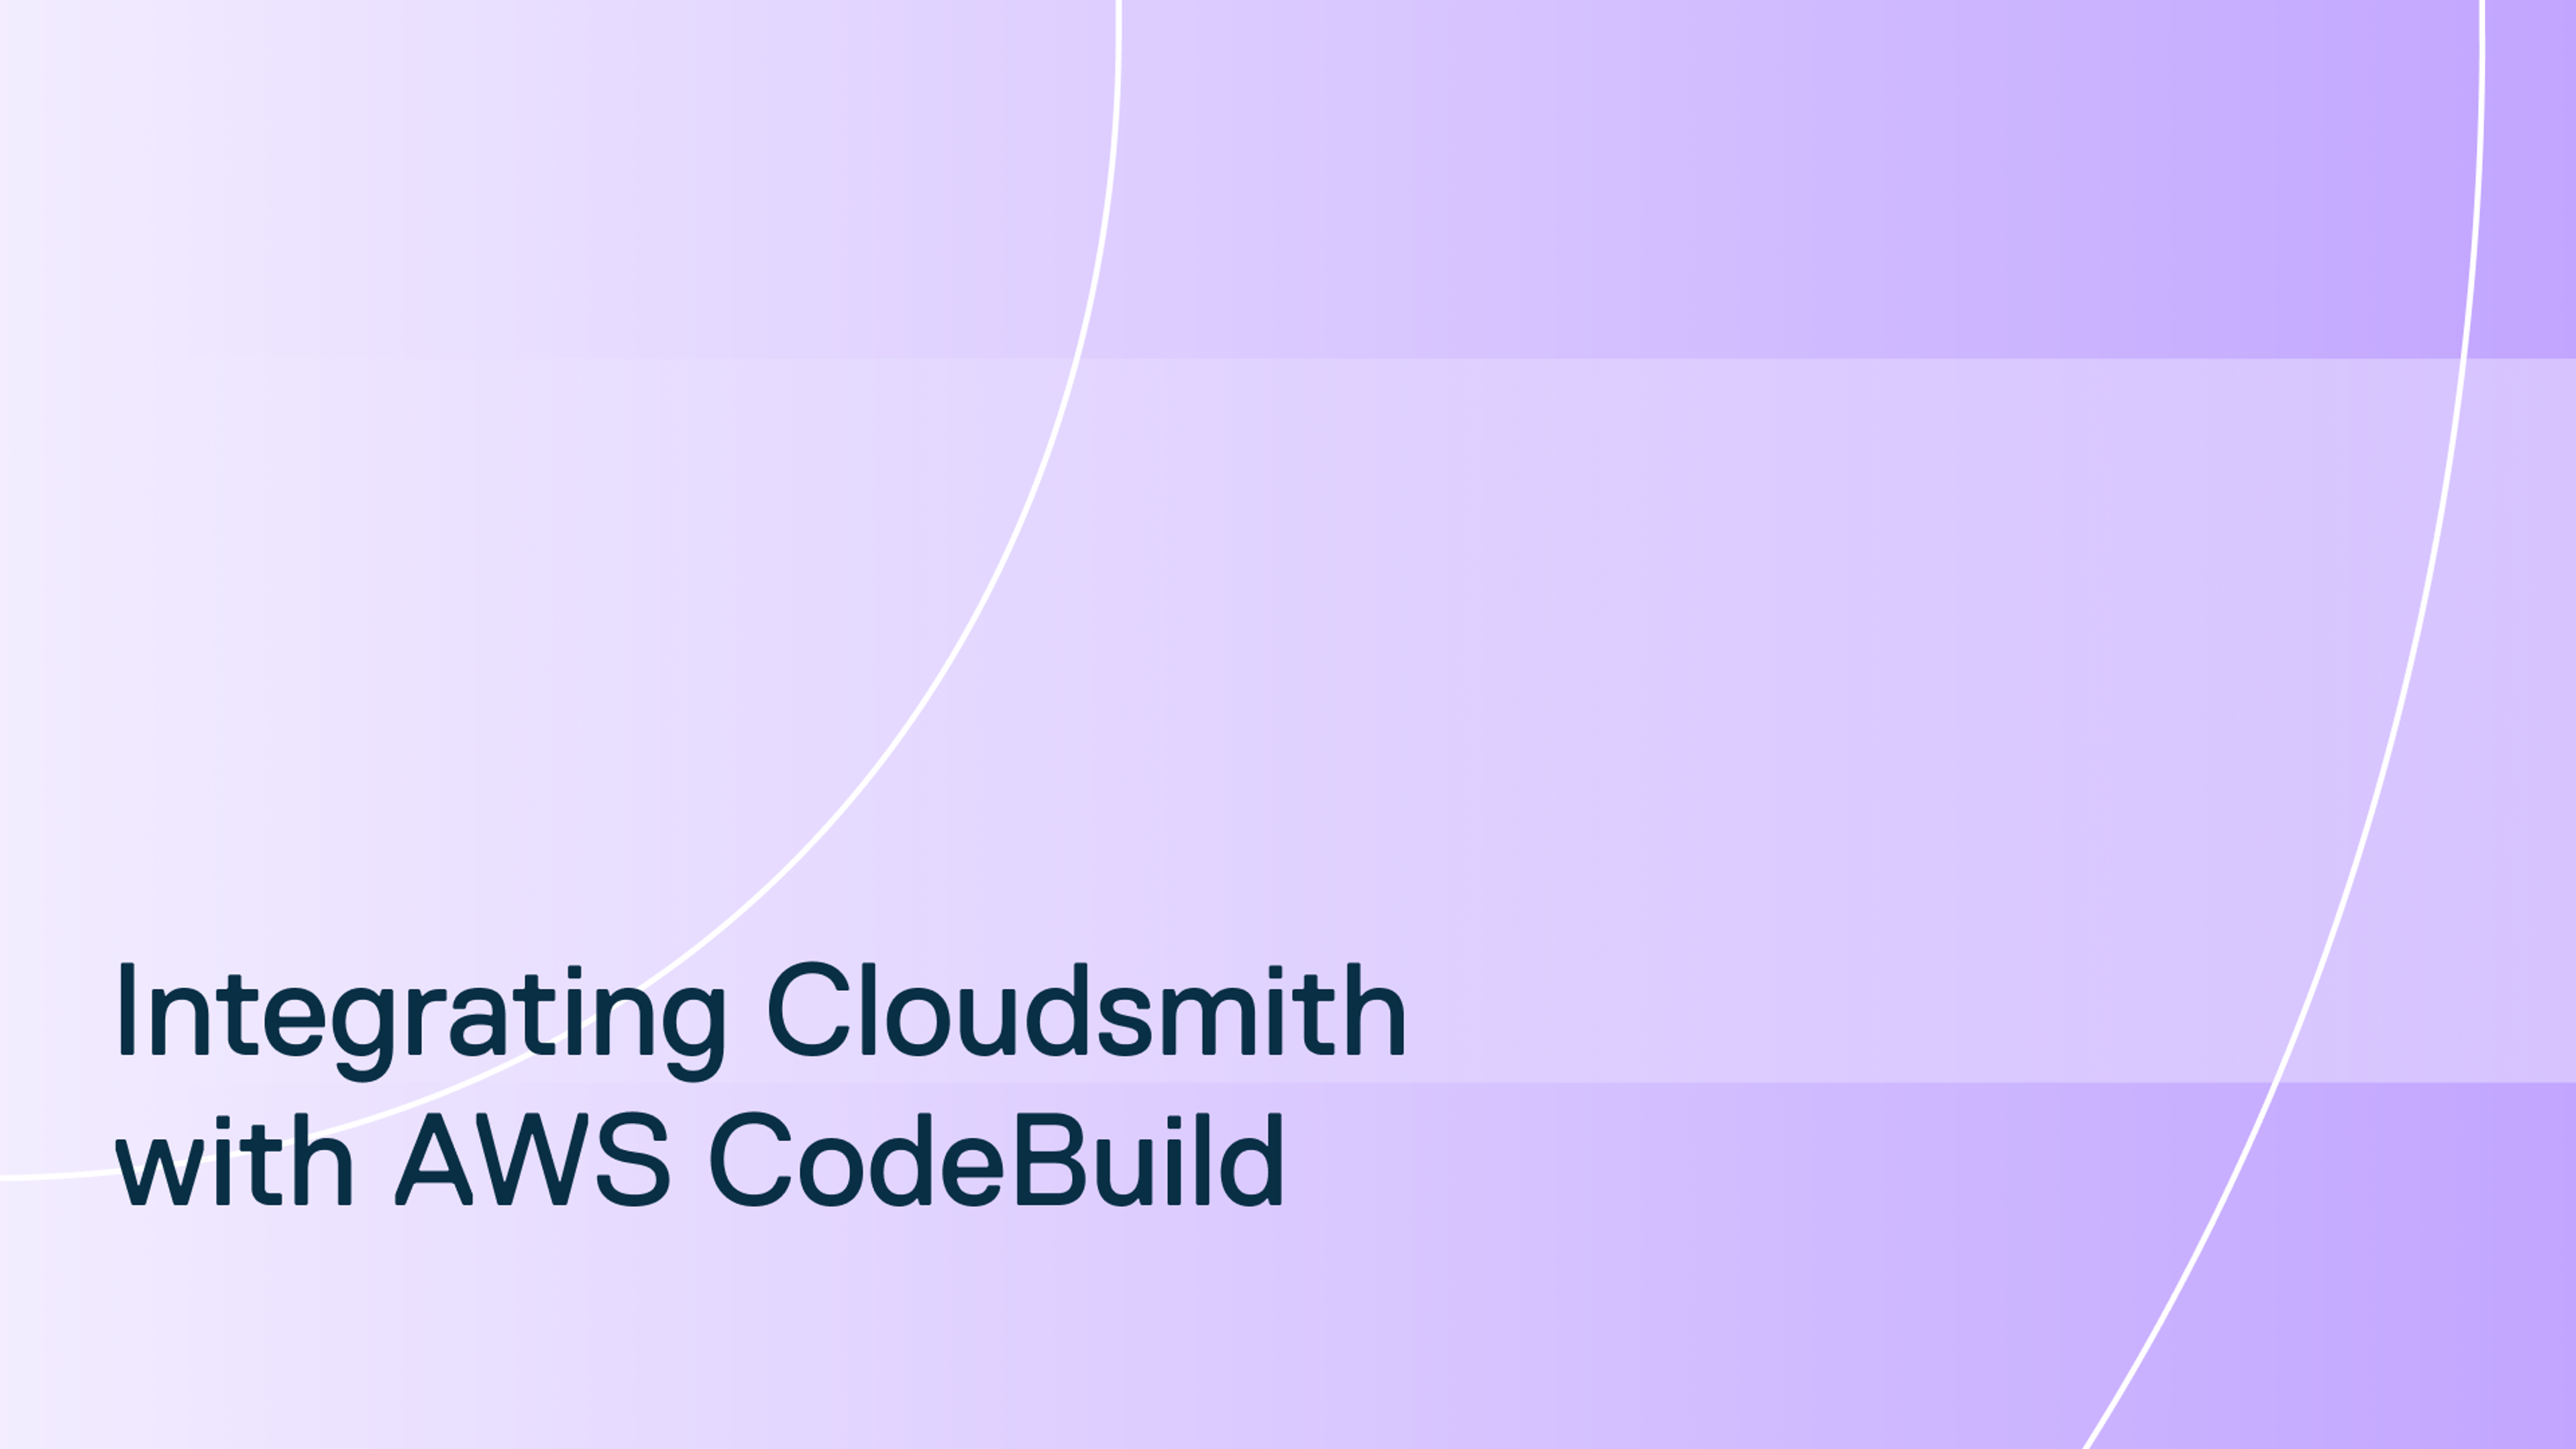 Using AWS CodeBuild to push package to Cloudsmith